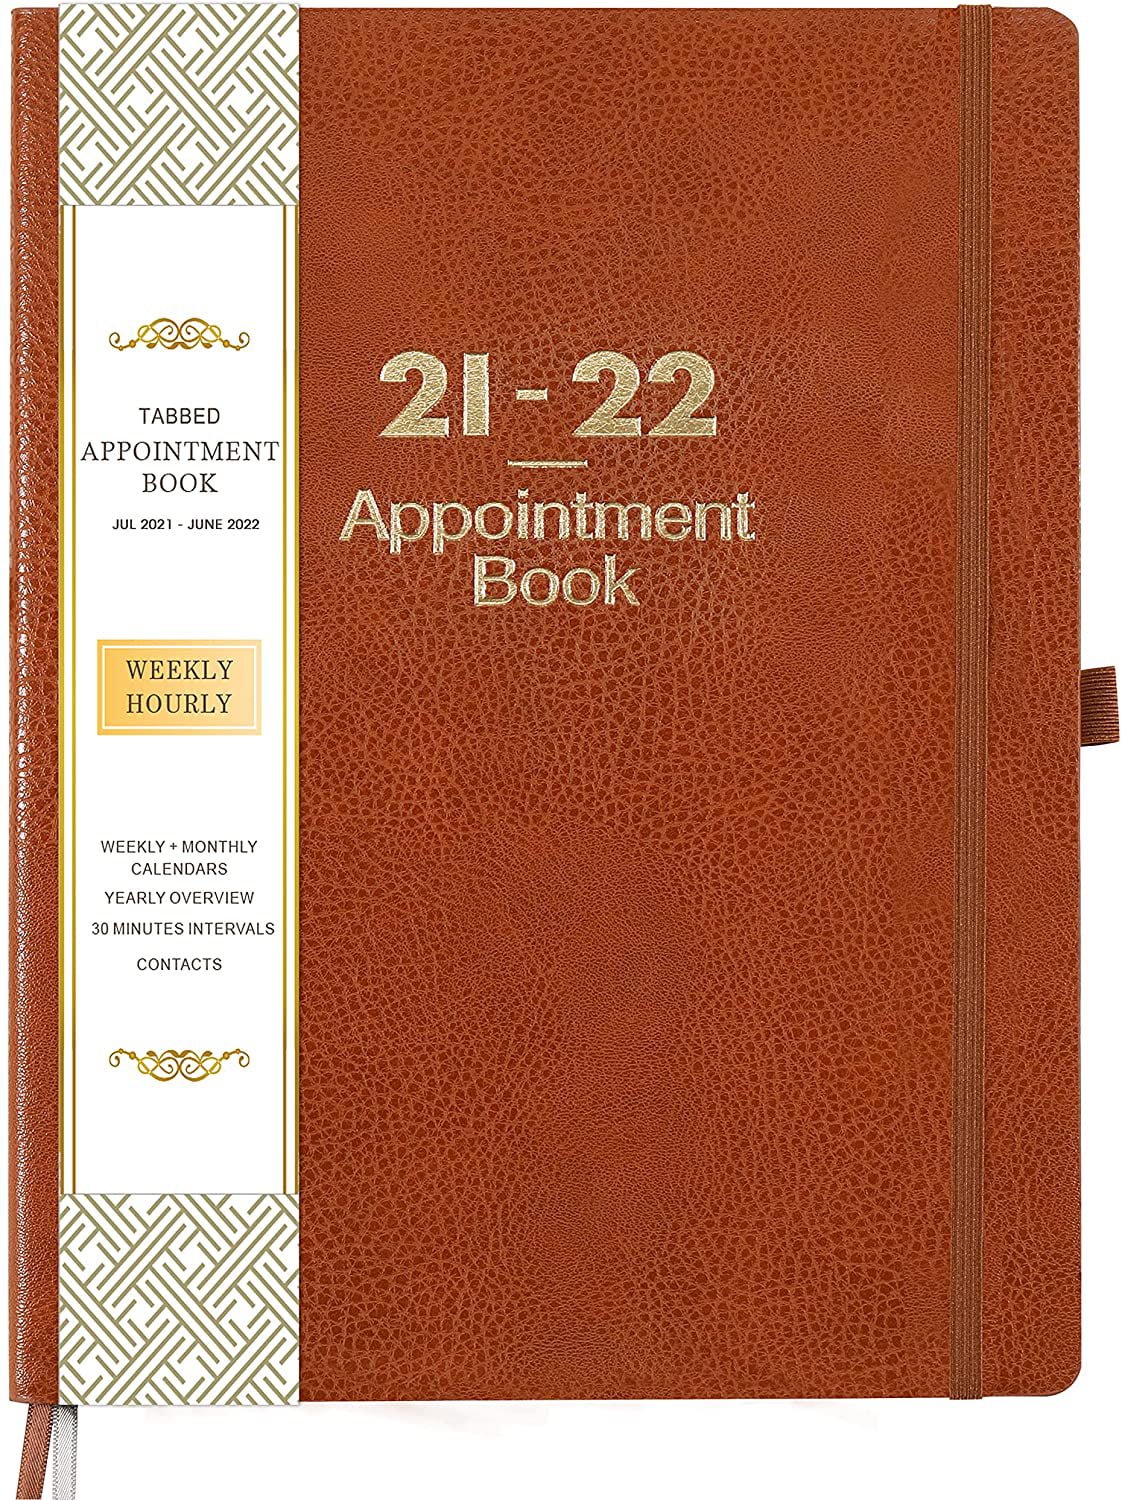 15-Minute Interval Inner Pocket Flexible Soft Cover 2022 Weekly Appointment Book & Planner -January 2022-December 2022 Daily Hourly Planner 8.4 x 11.1 Elastic Closure